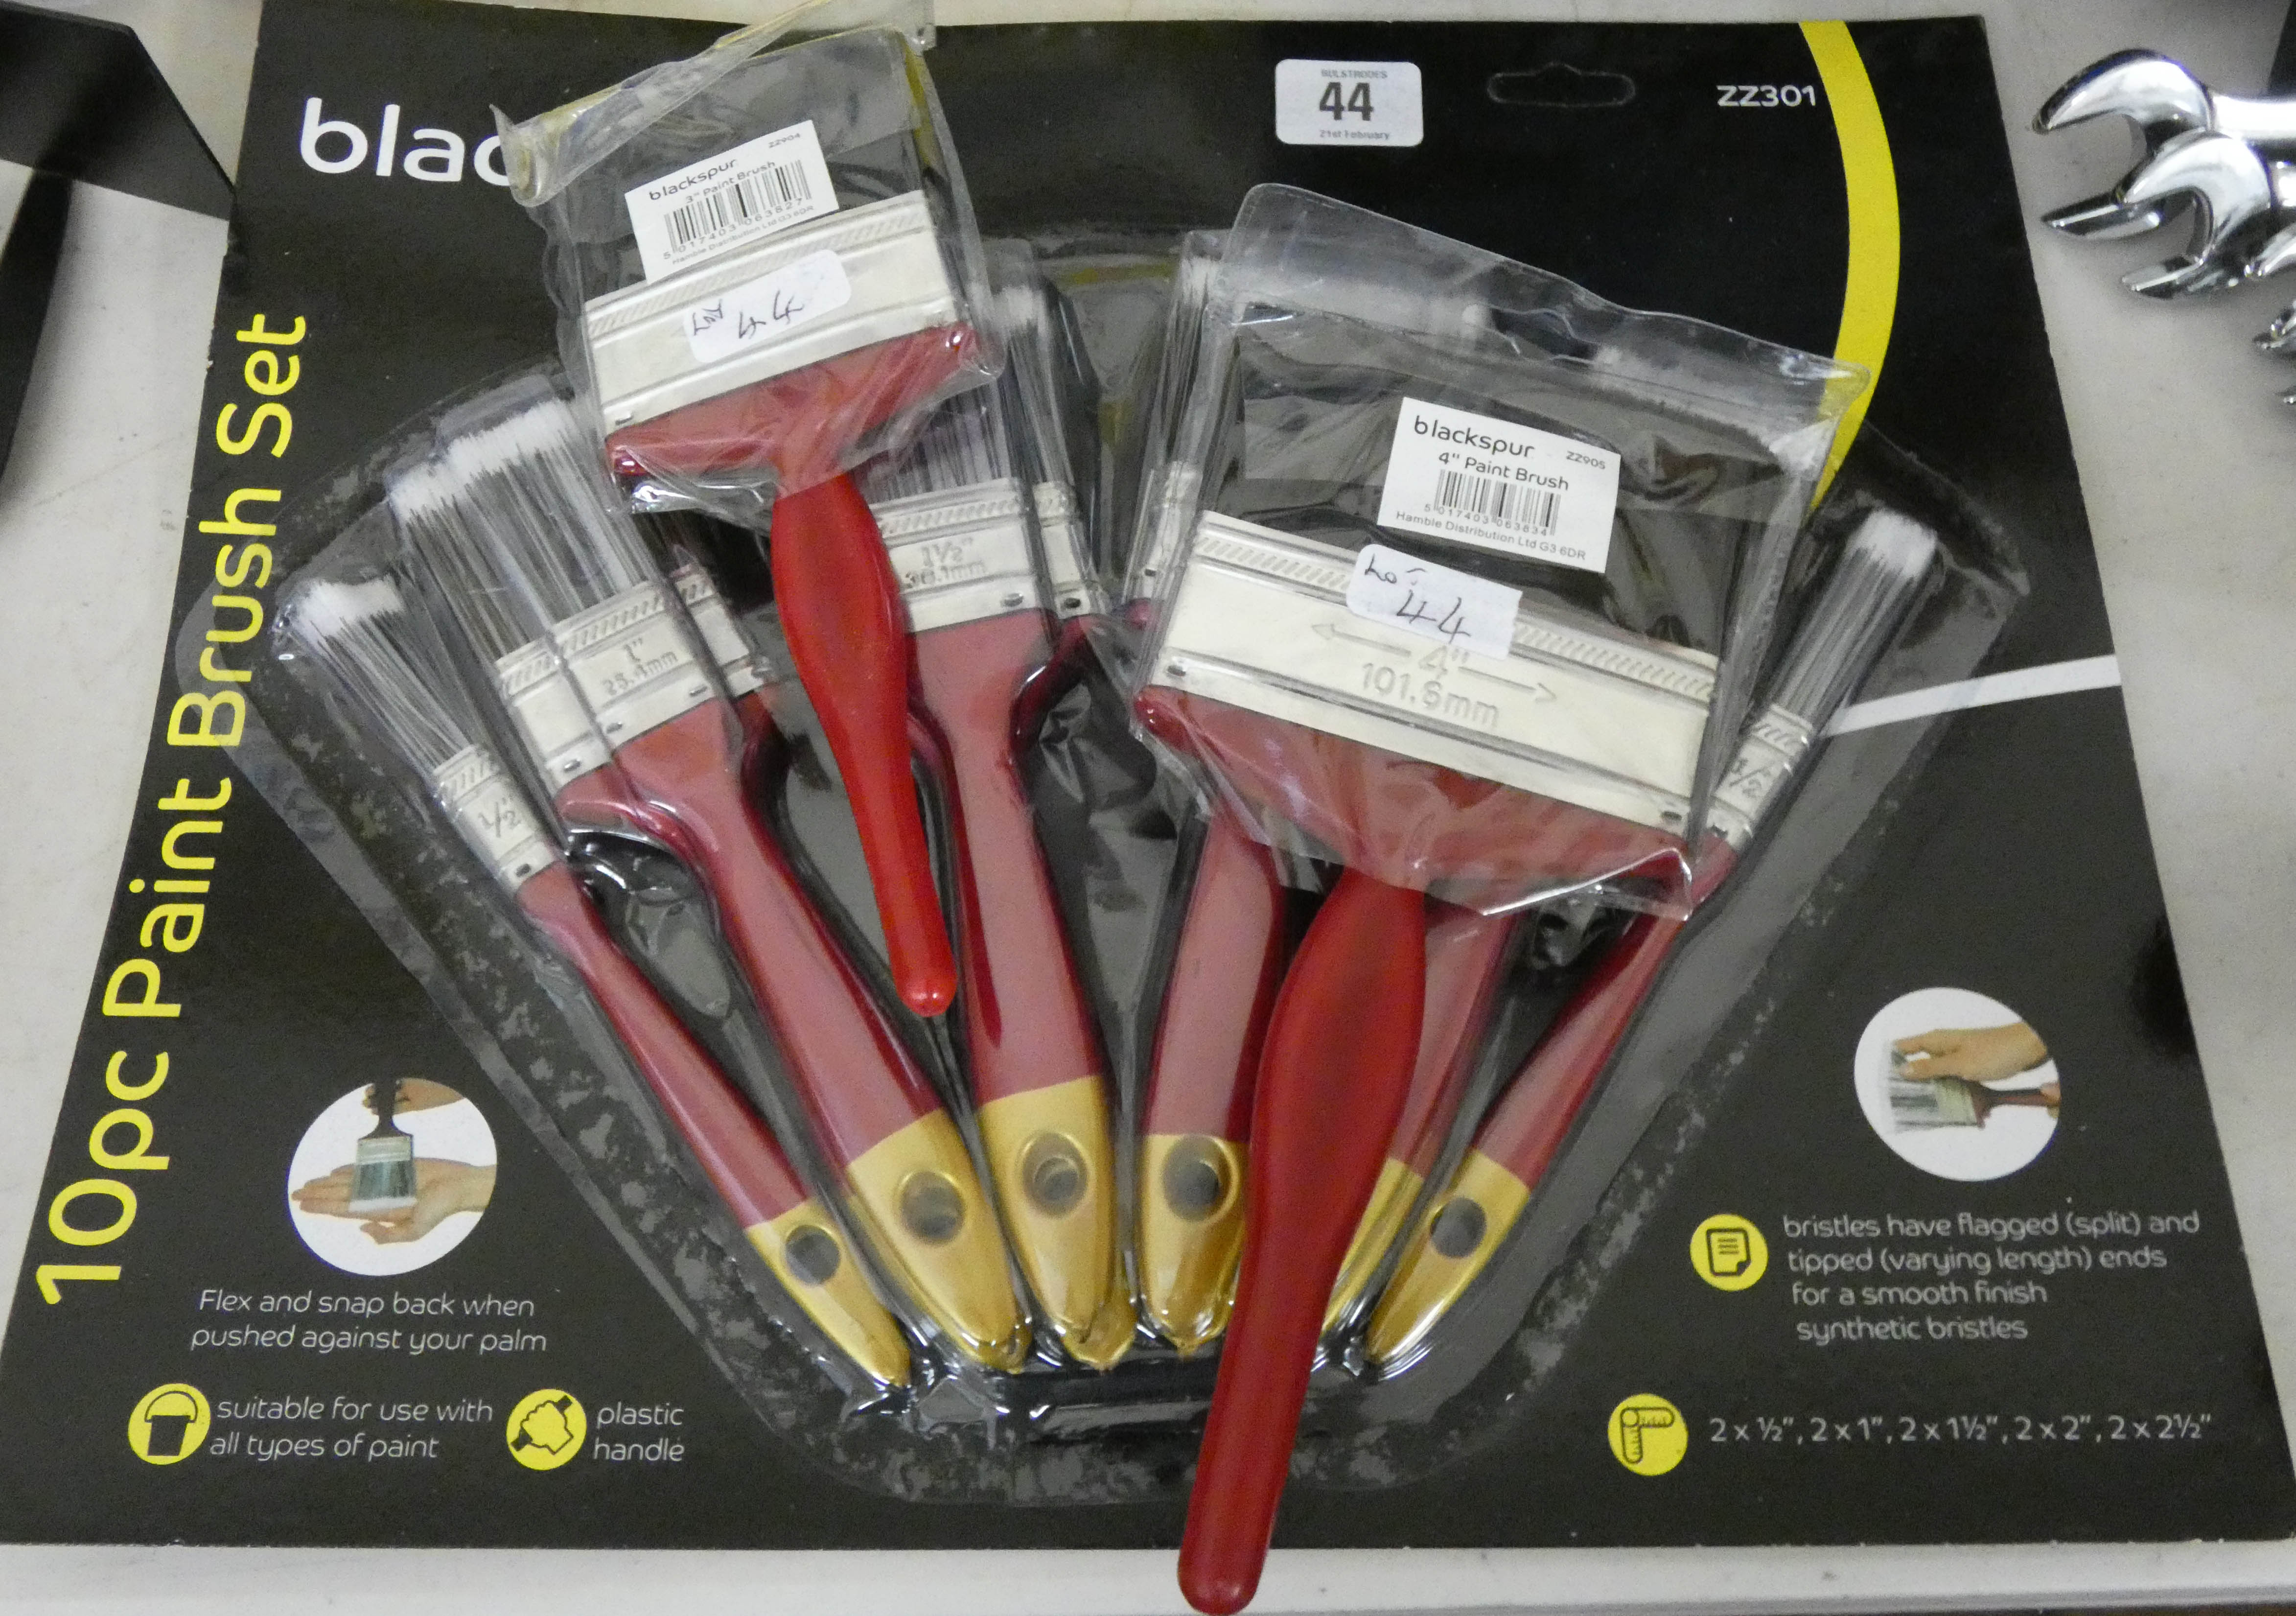 A new 10 piece paint brush set and two new 3" and 4" paintbrushes